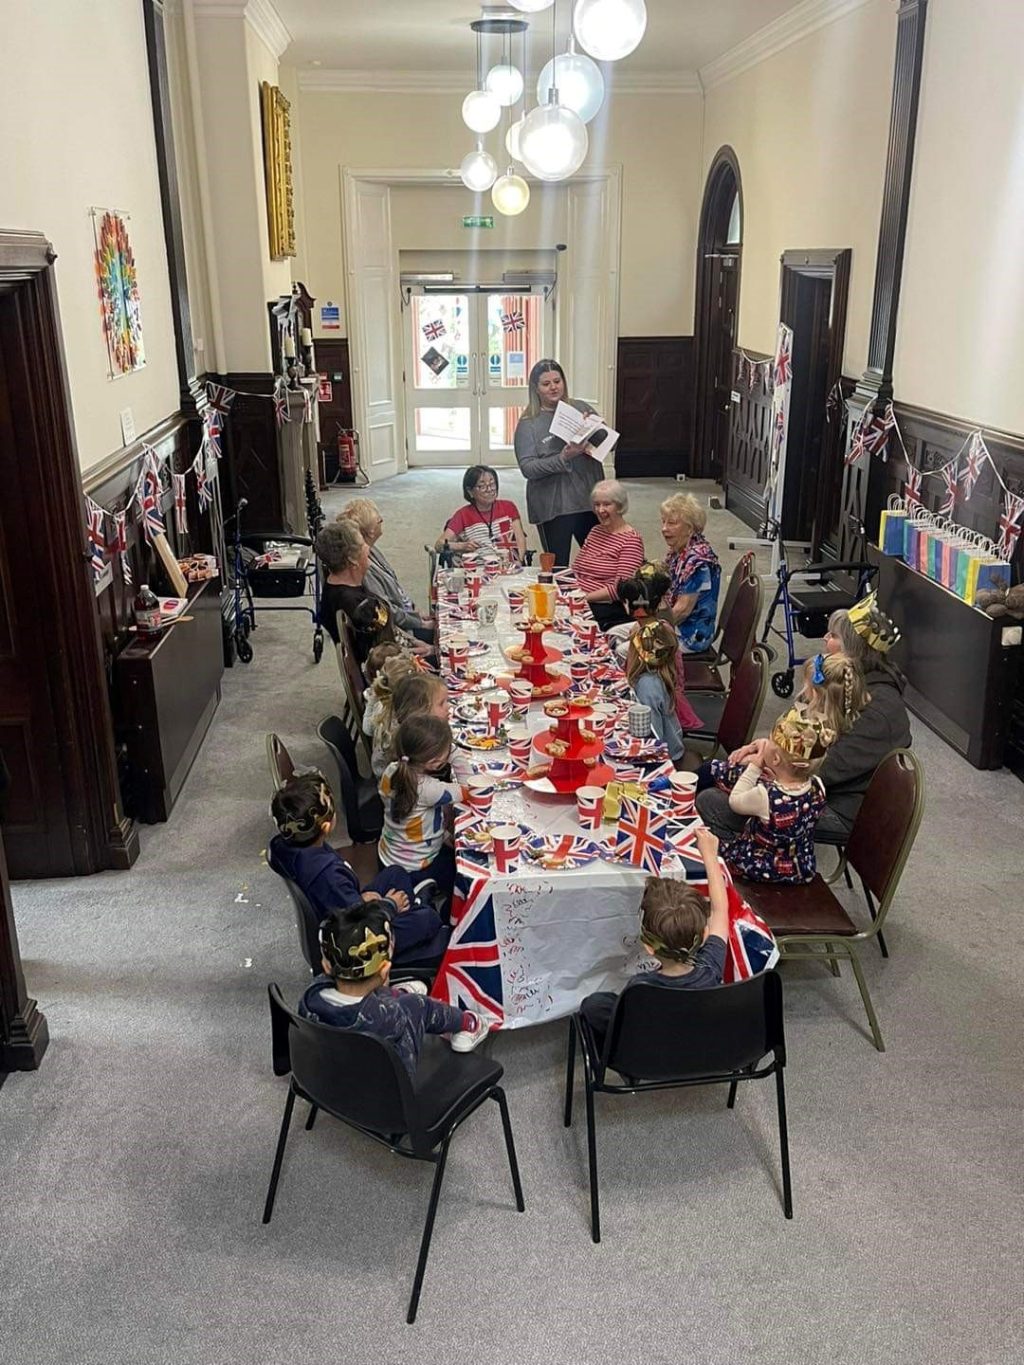 A group of children and adults enjoying a lunch to celebrate the King's coronation. The table is decorated with union jack flags and most people are wearing paper crowns.